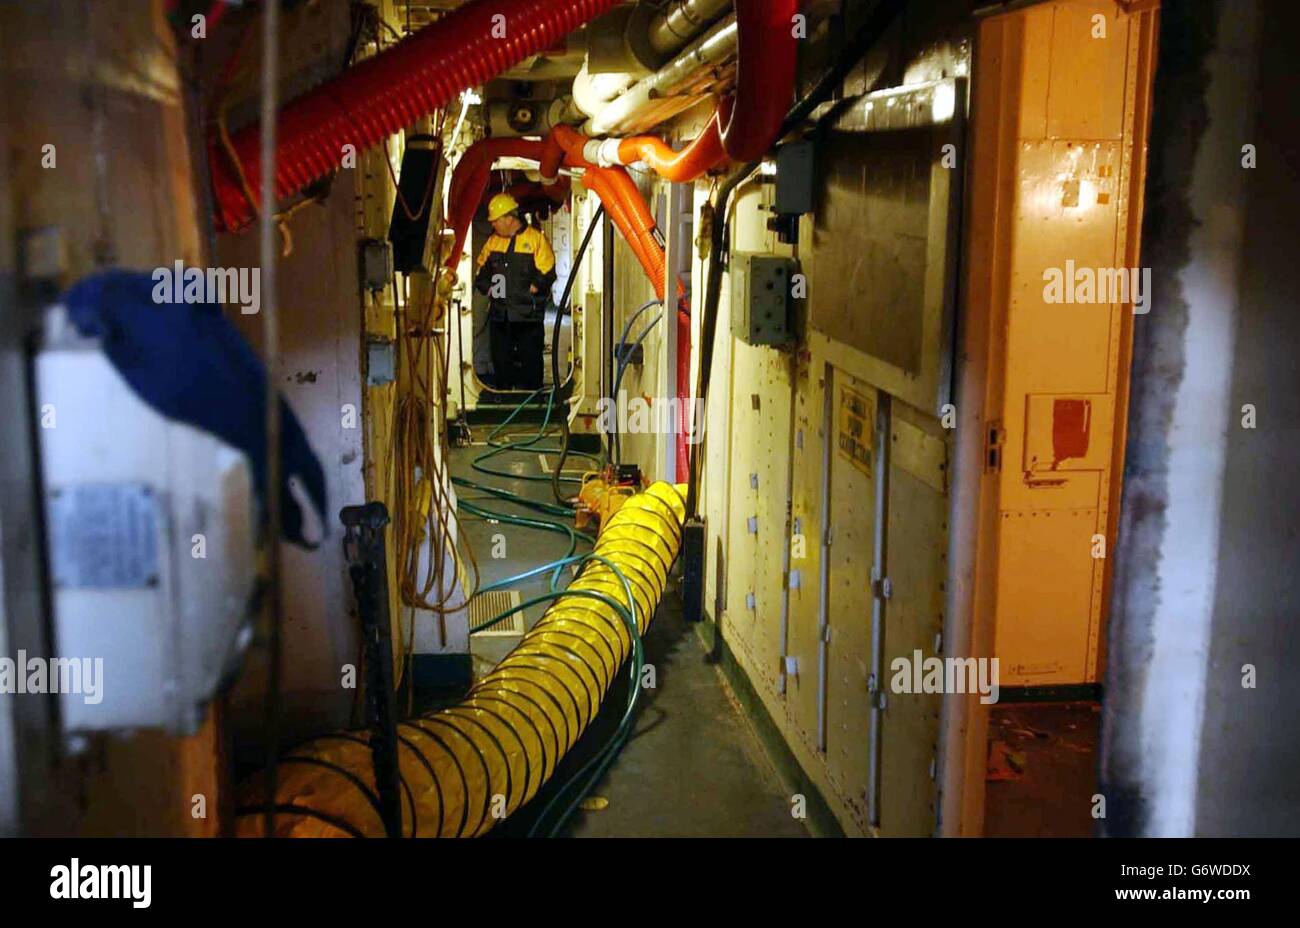 Below decks of the ex-Royal Navy frigate Scylla at Devonport Dockyard, Plymouth. The vessel is due to be placed on the seabed in Whitsand Bay off Plymouth thus creating a diving reef. Stock Photo